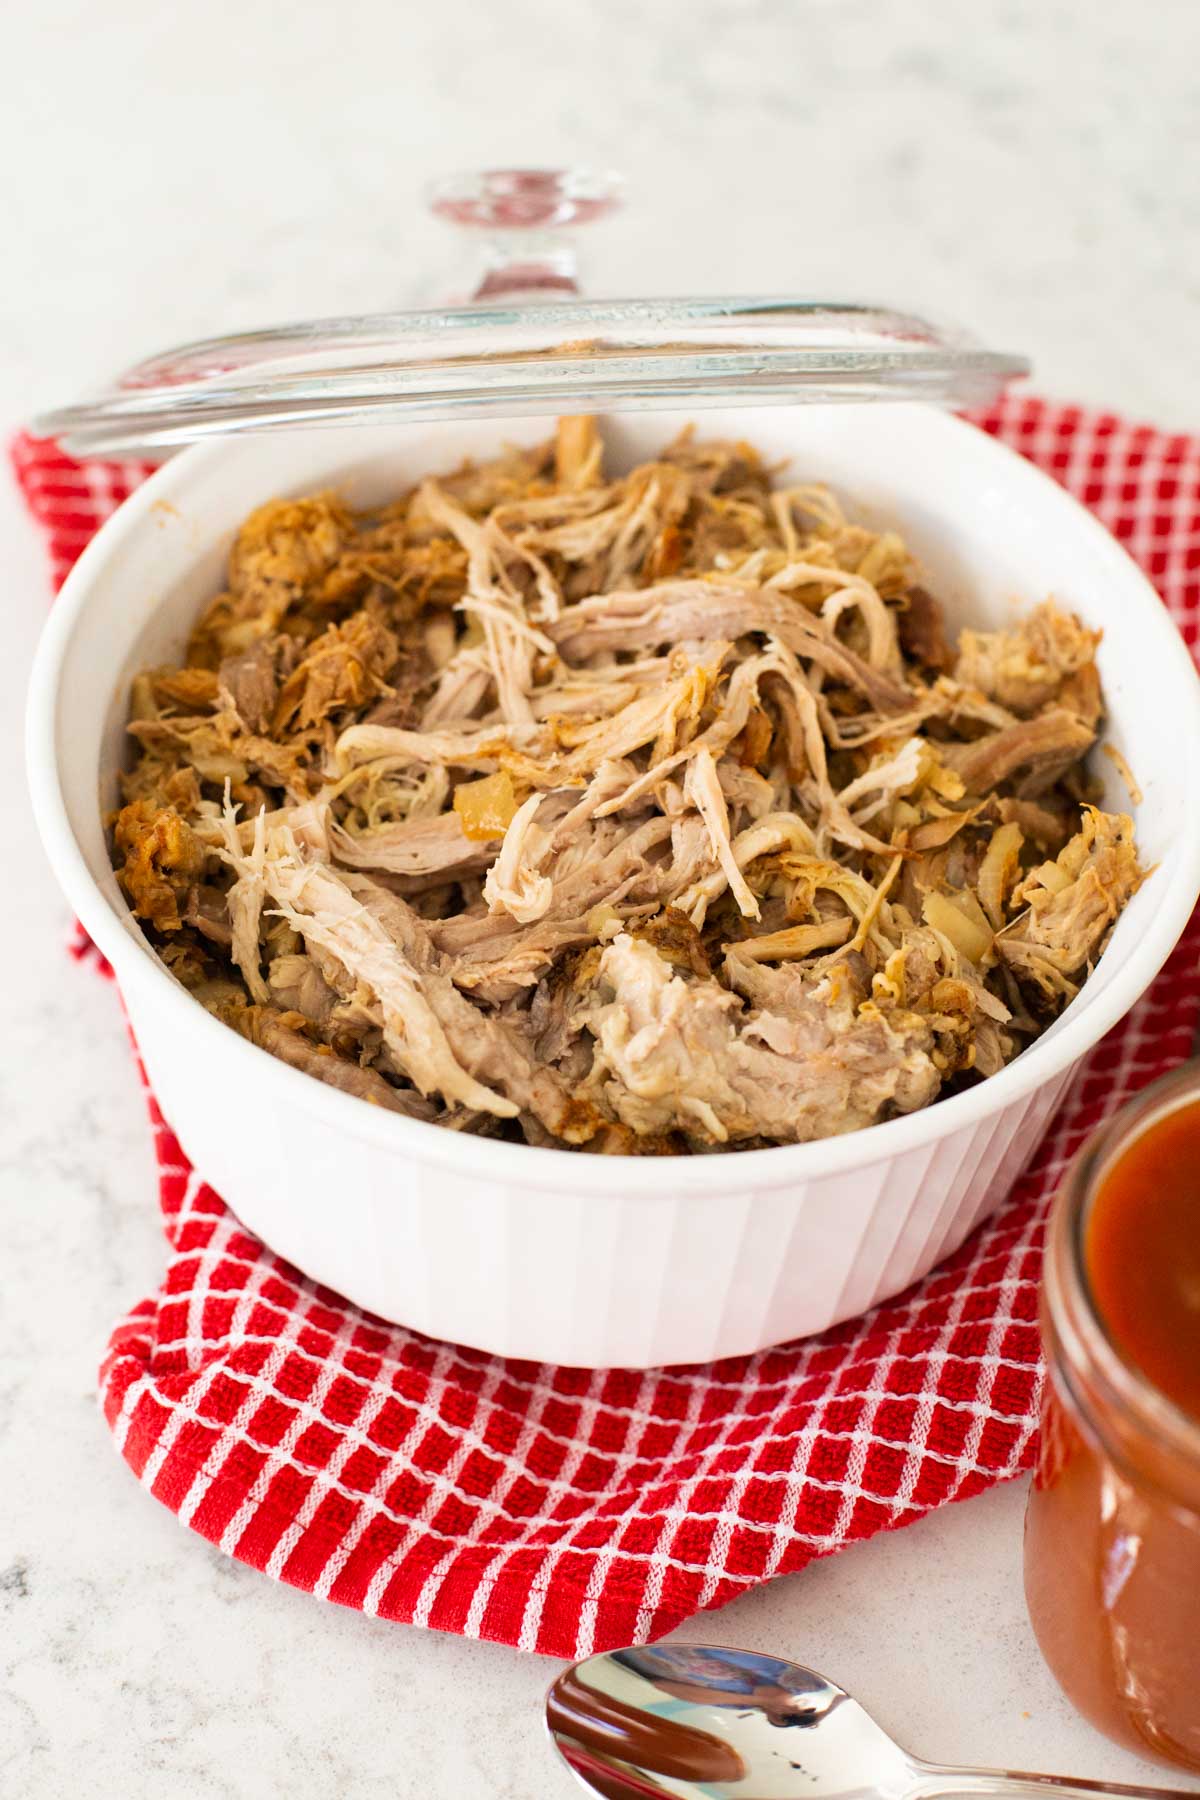 The cooked pork has been shredded and sits in a casserole dish.